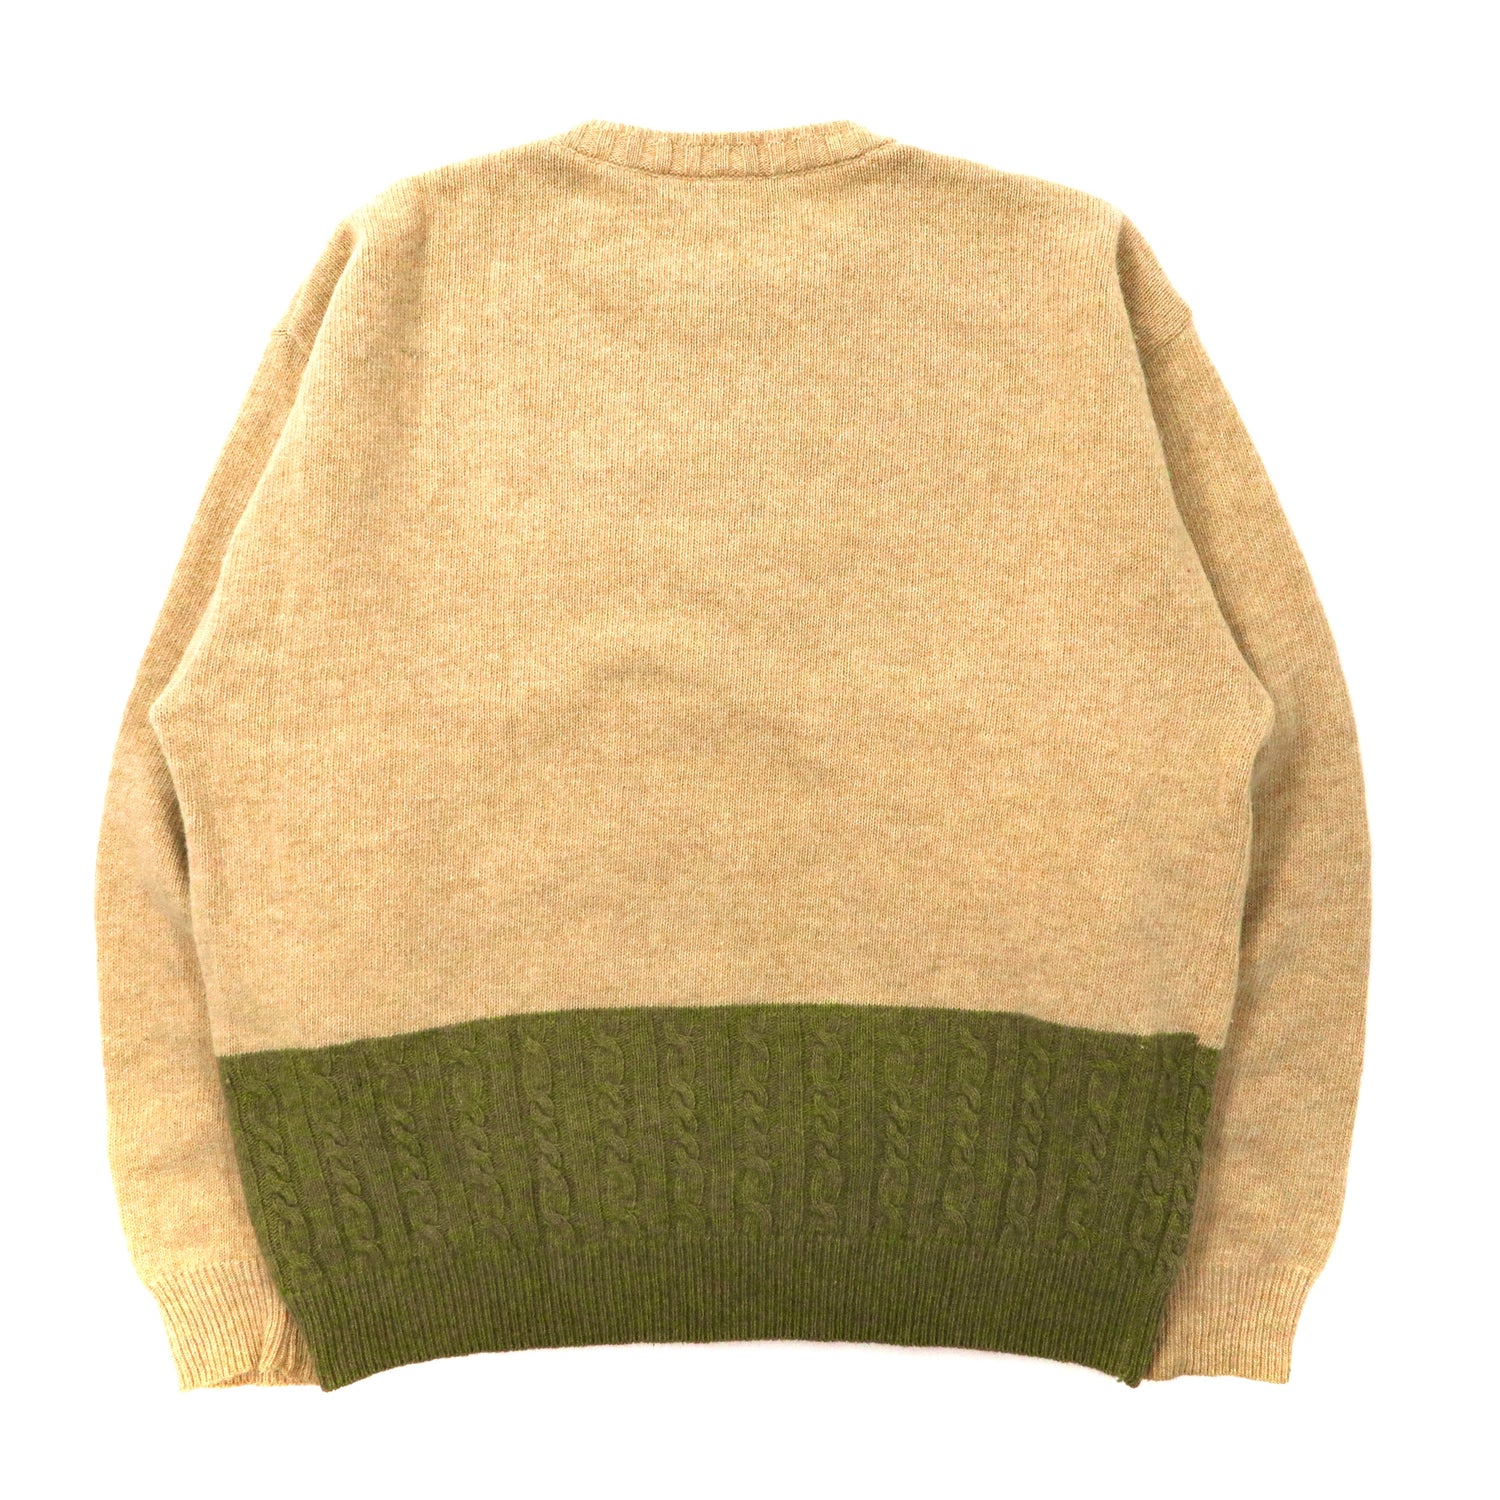 Xerio Character Knit Sweater M Beige Wool Italy MADE – 日本然